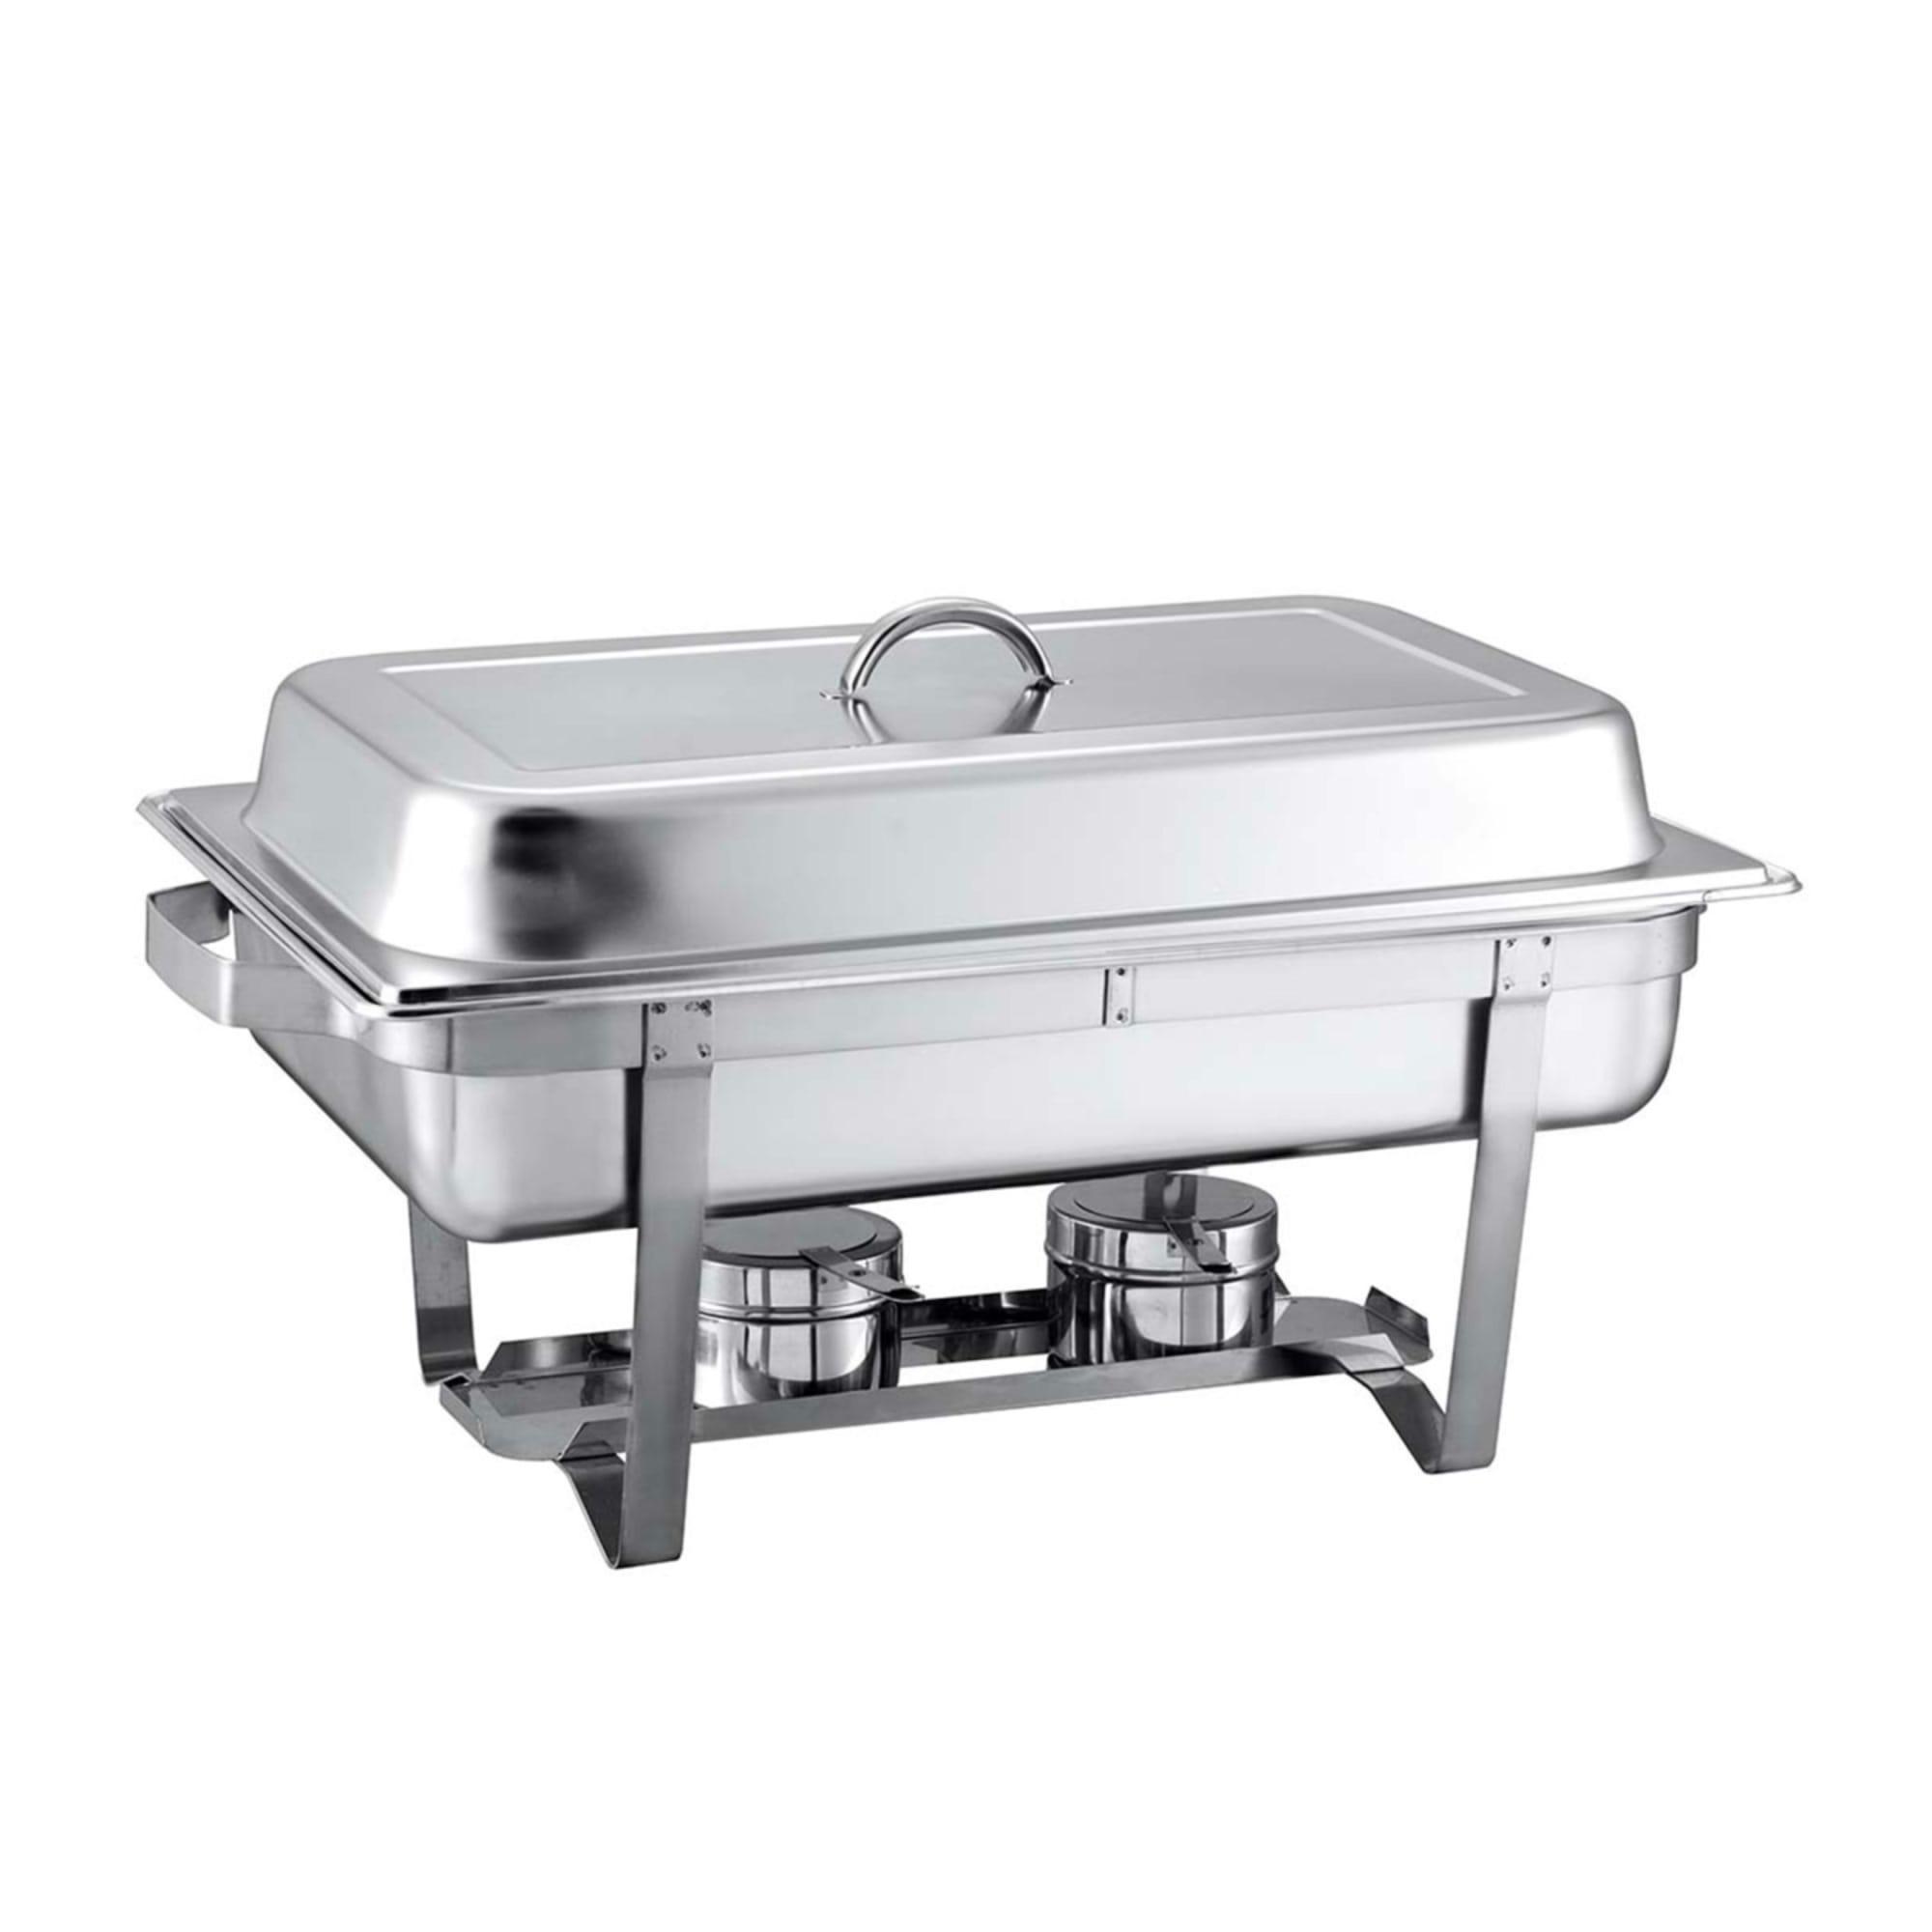 Soga Rectangular Stainless Steel Triple Tray Chafing Dish Image 3